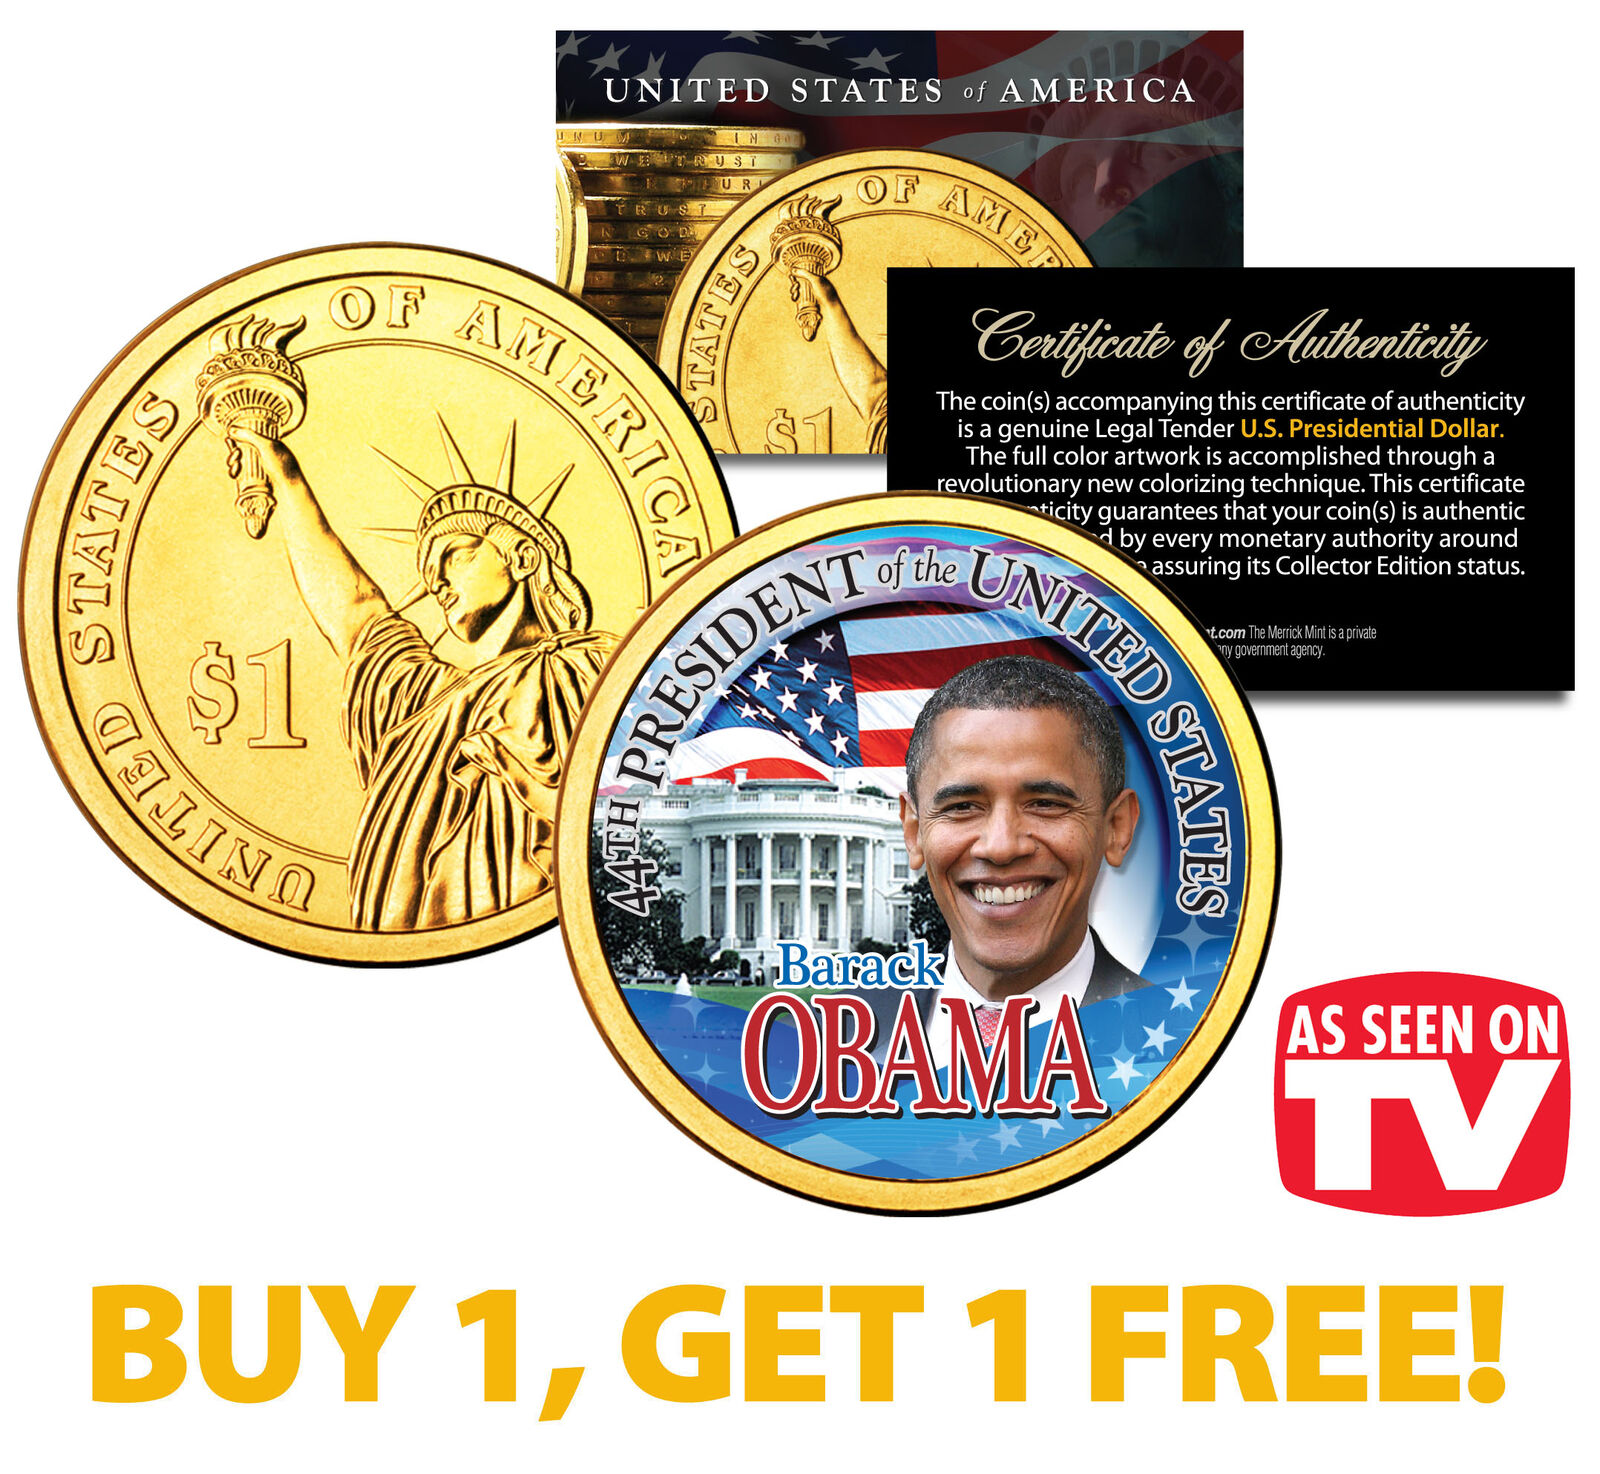 BARACK OBAMA Presidential $1 Dollar Coin Gold Plated *AS SEEN ON TV* BUY 1 GET 1